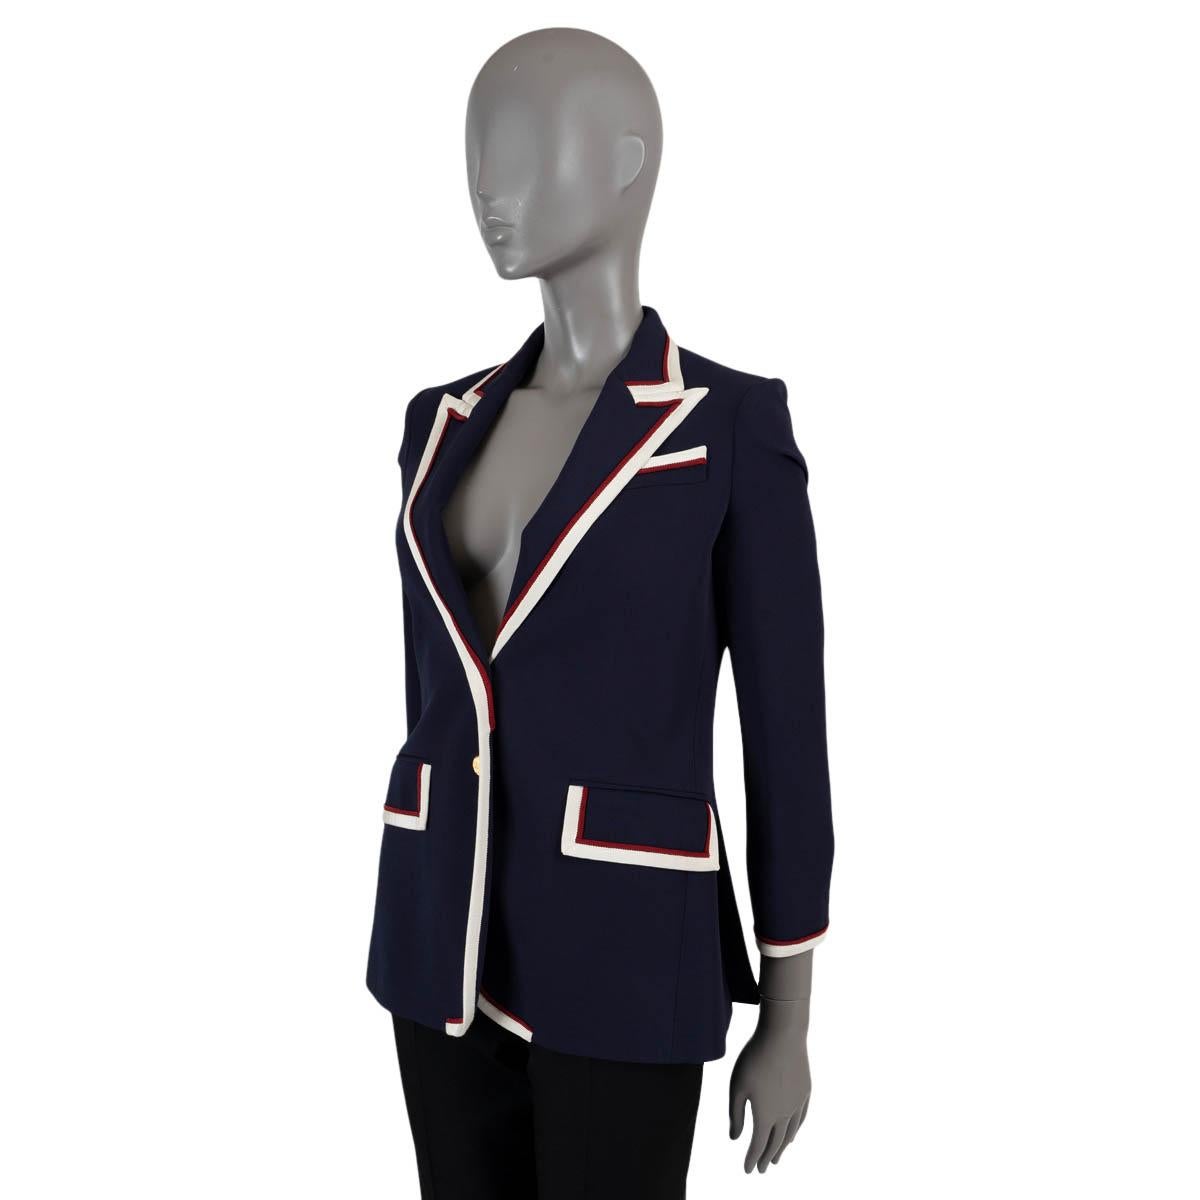 100% authentic Gucci stretch cady blazer in navy blue viscose (with 3% elastane). Features white and red grosgrain trim, peak lapels, buttoned cuffs and two flap pockets. Closes with two gold-tone buttons on the front and is lined in printed silk